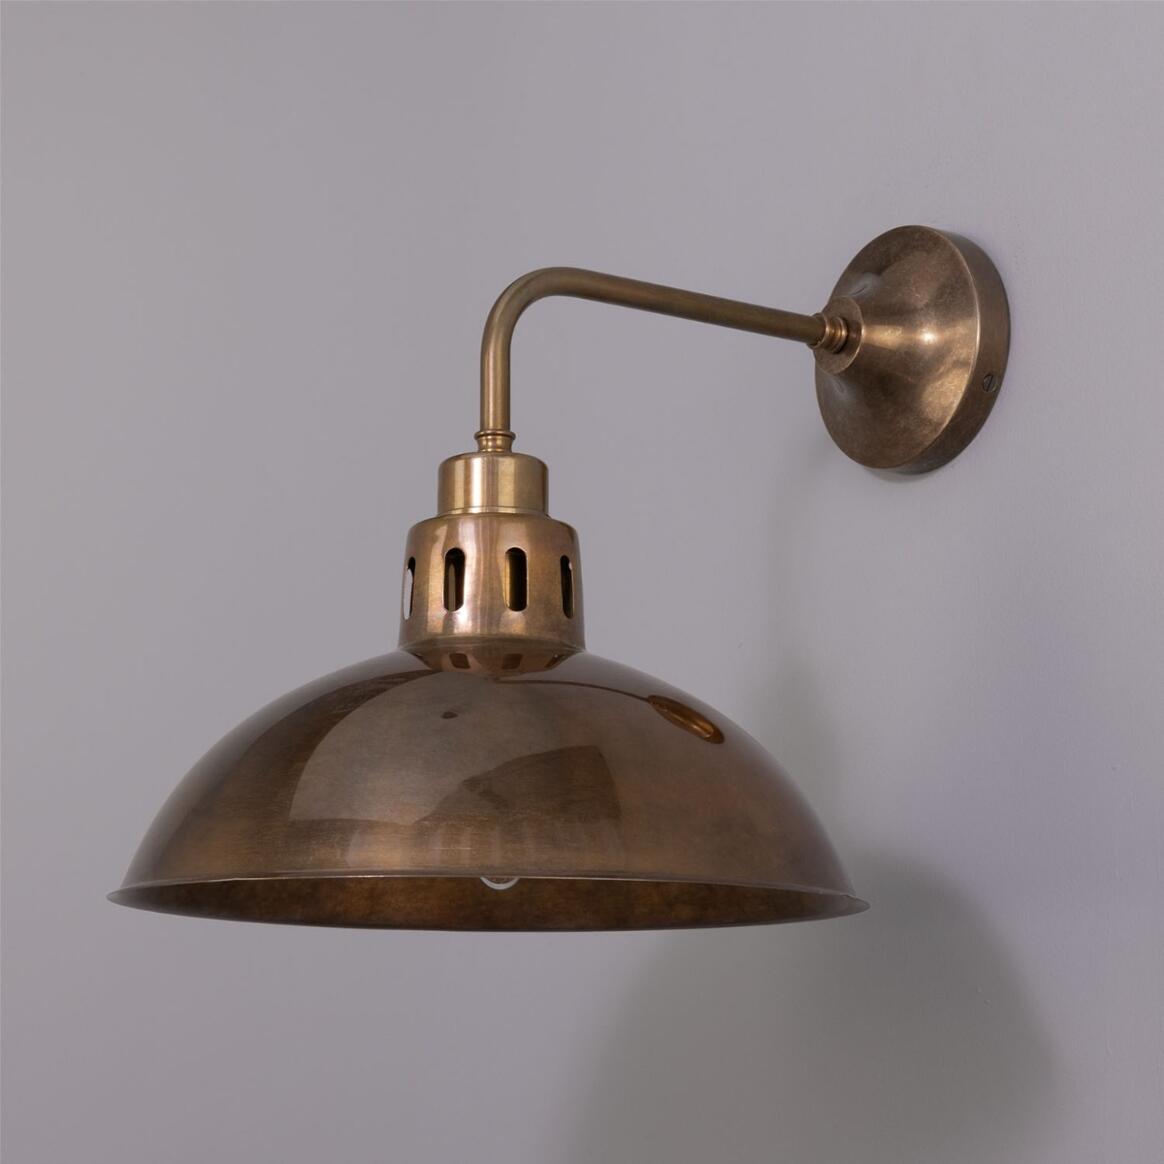 Paris Industrial Brass Wall Light 11.8" main product image